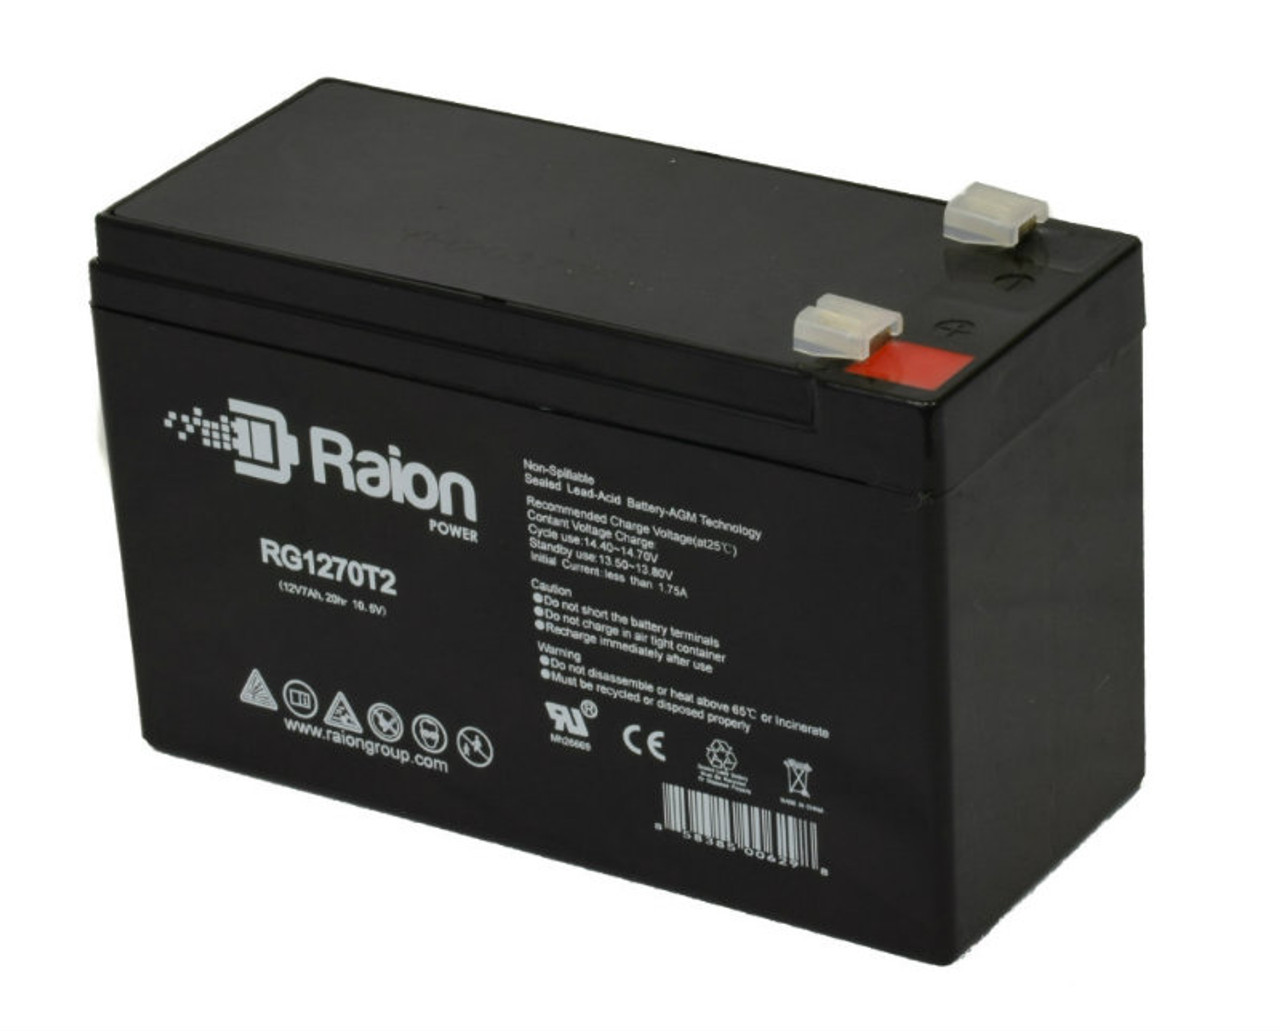 Raion Power RG1270T1 12V 7Ah Non-Spillable Replacement Battery for Chilwee 6-FM-7